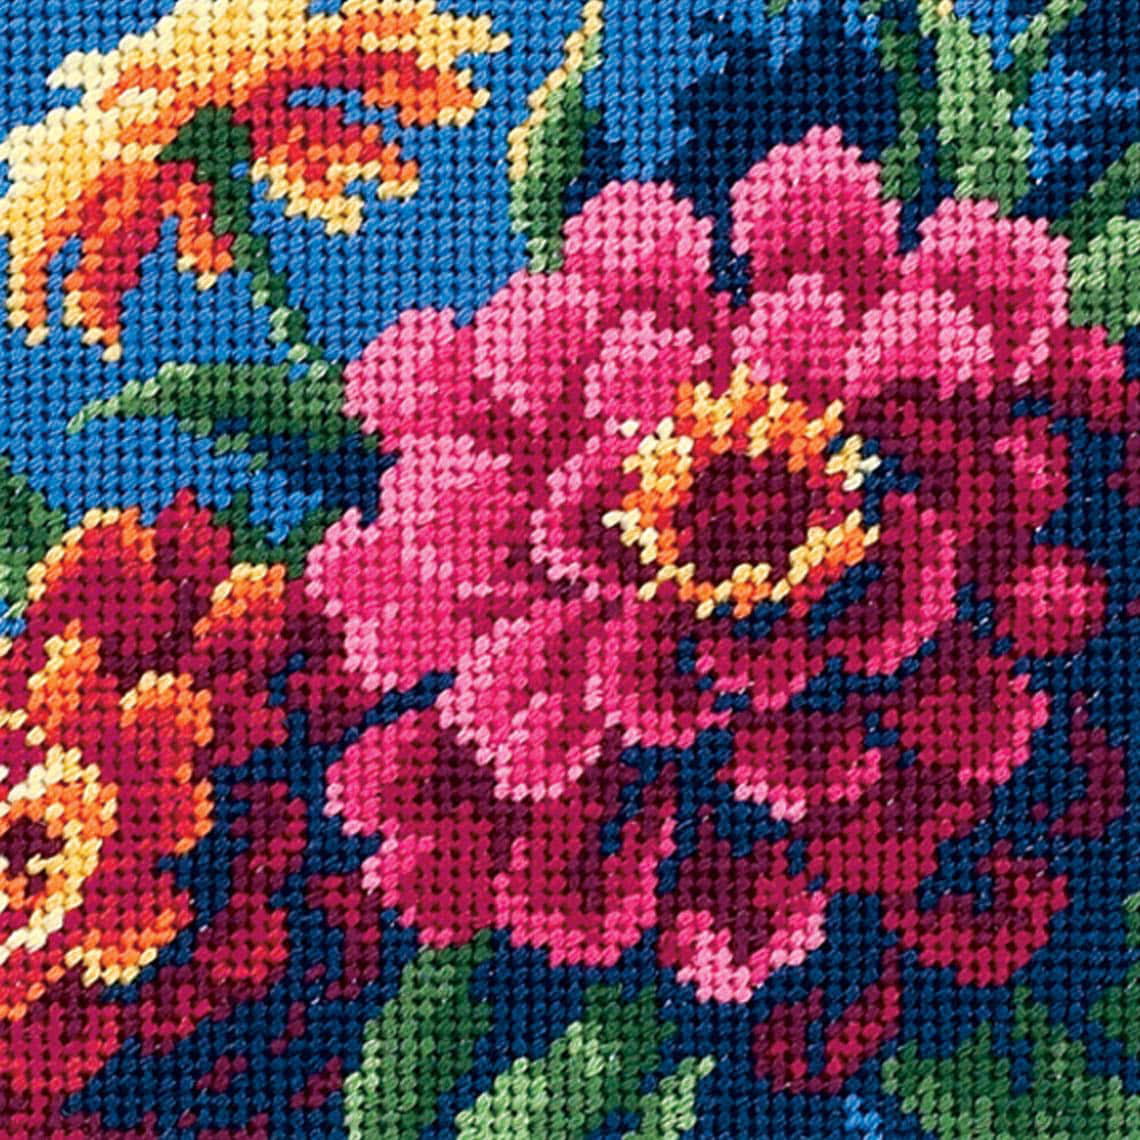 Multicolor 12 by 12 Tobin 2615 Stitched in Acrylic Yarn Midnight Floral Needlepoint Kit